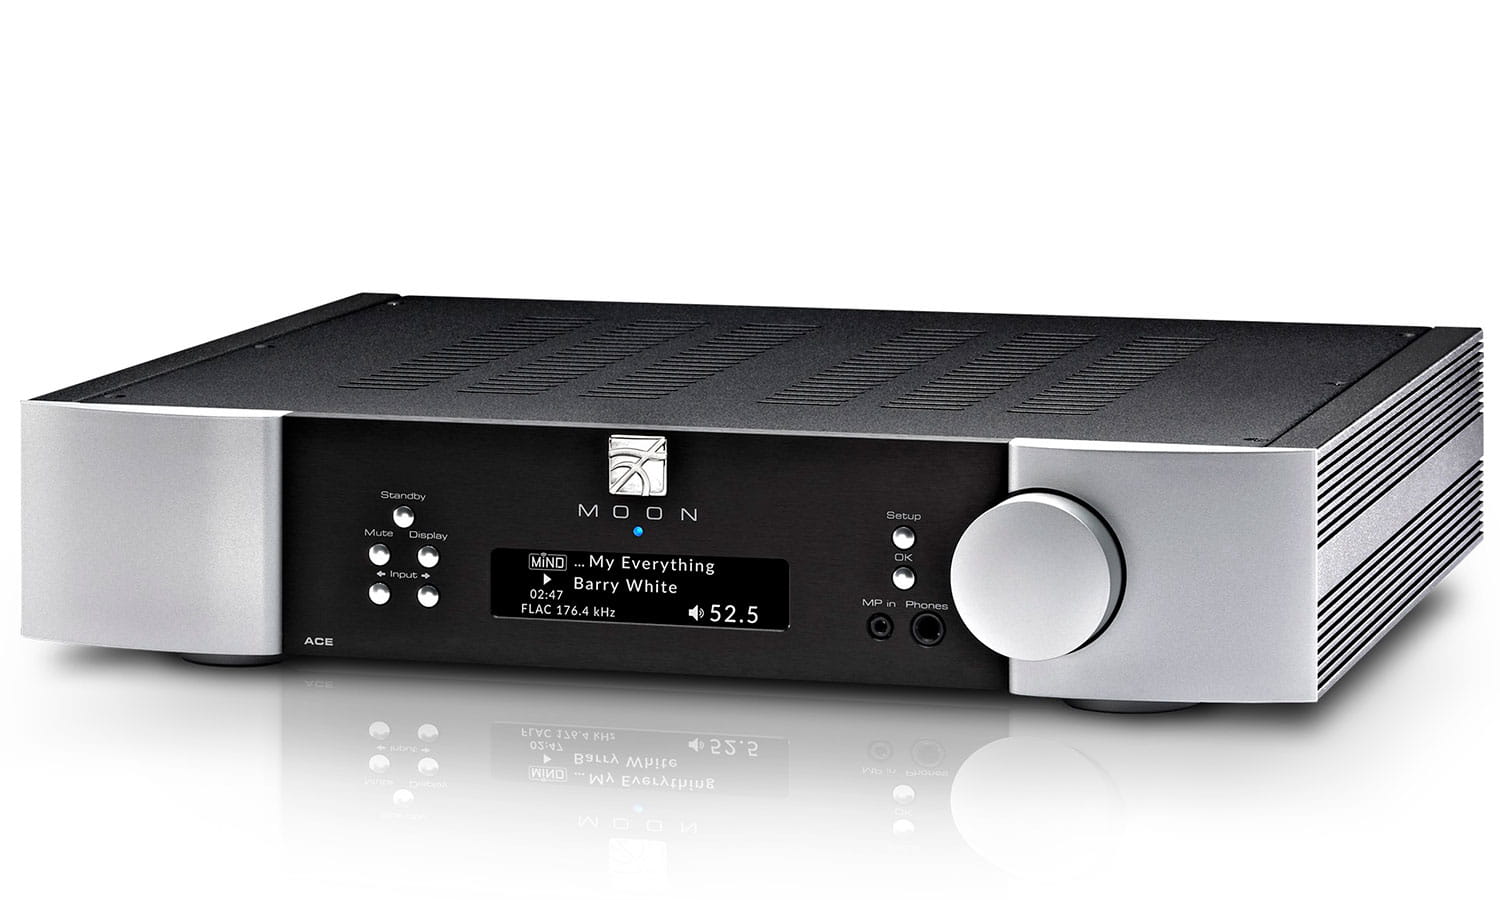 All-in-one audio component combining a network player, DAC and integrated amplifier. Simply hook up a pair of speakers and stream music from the internet.